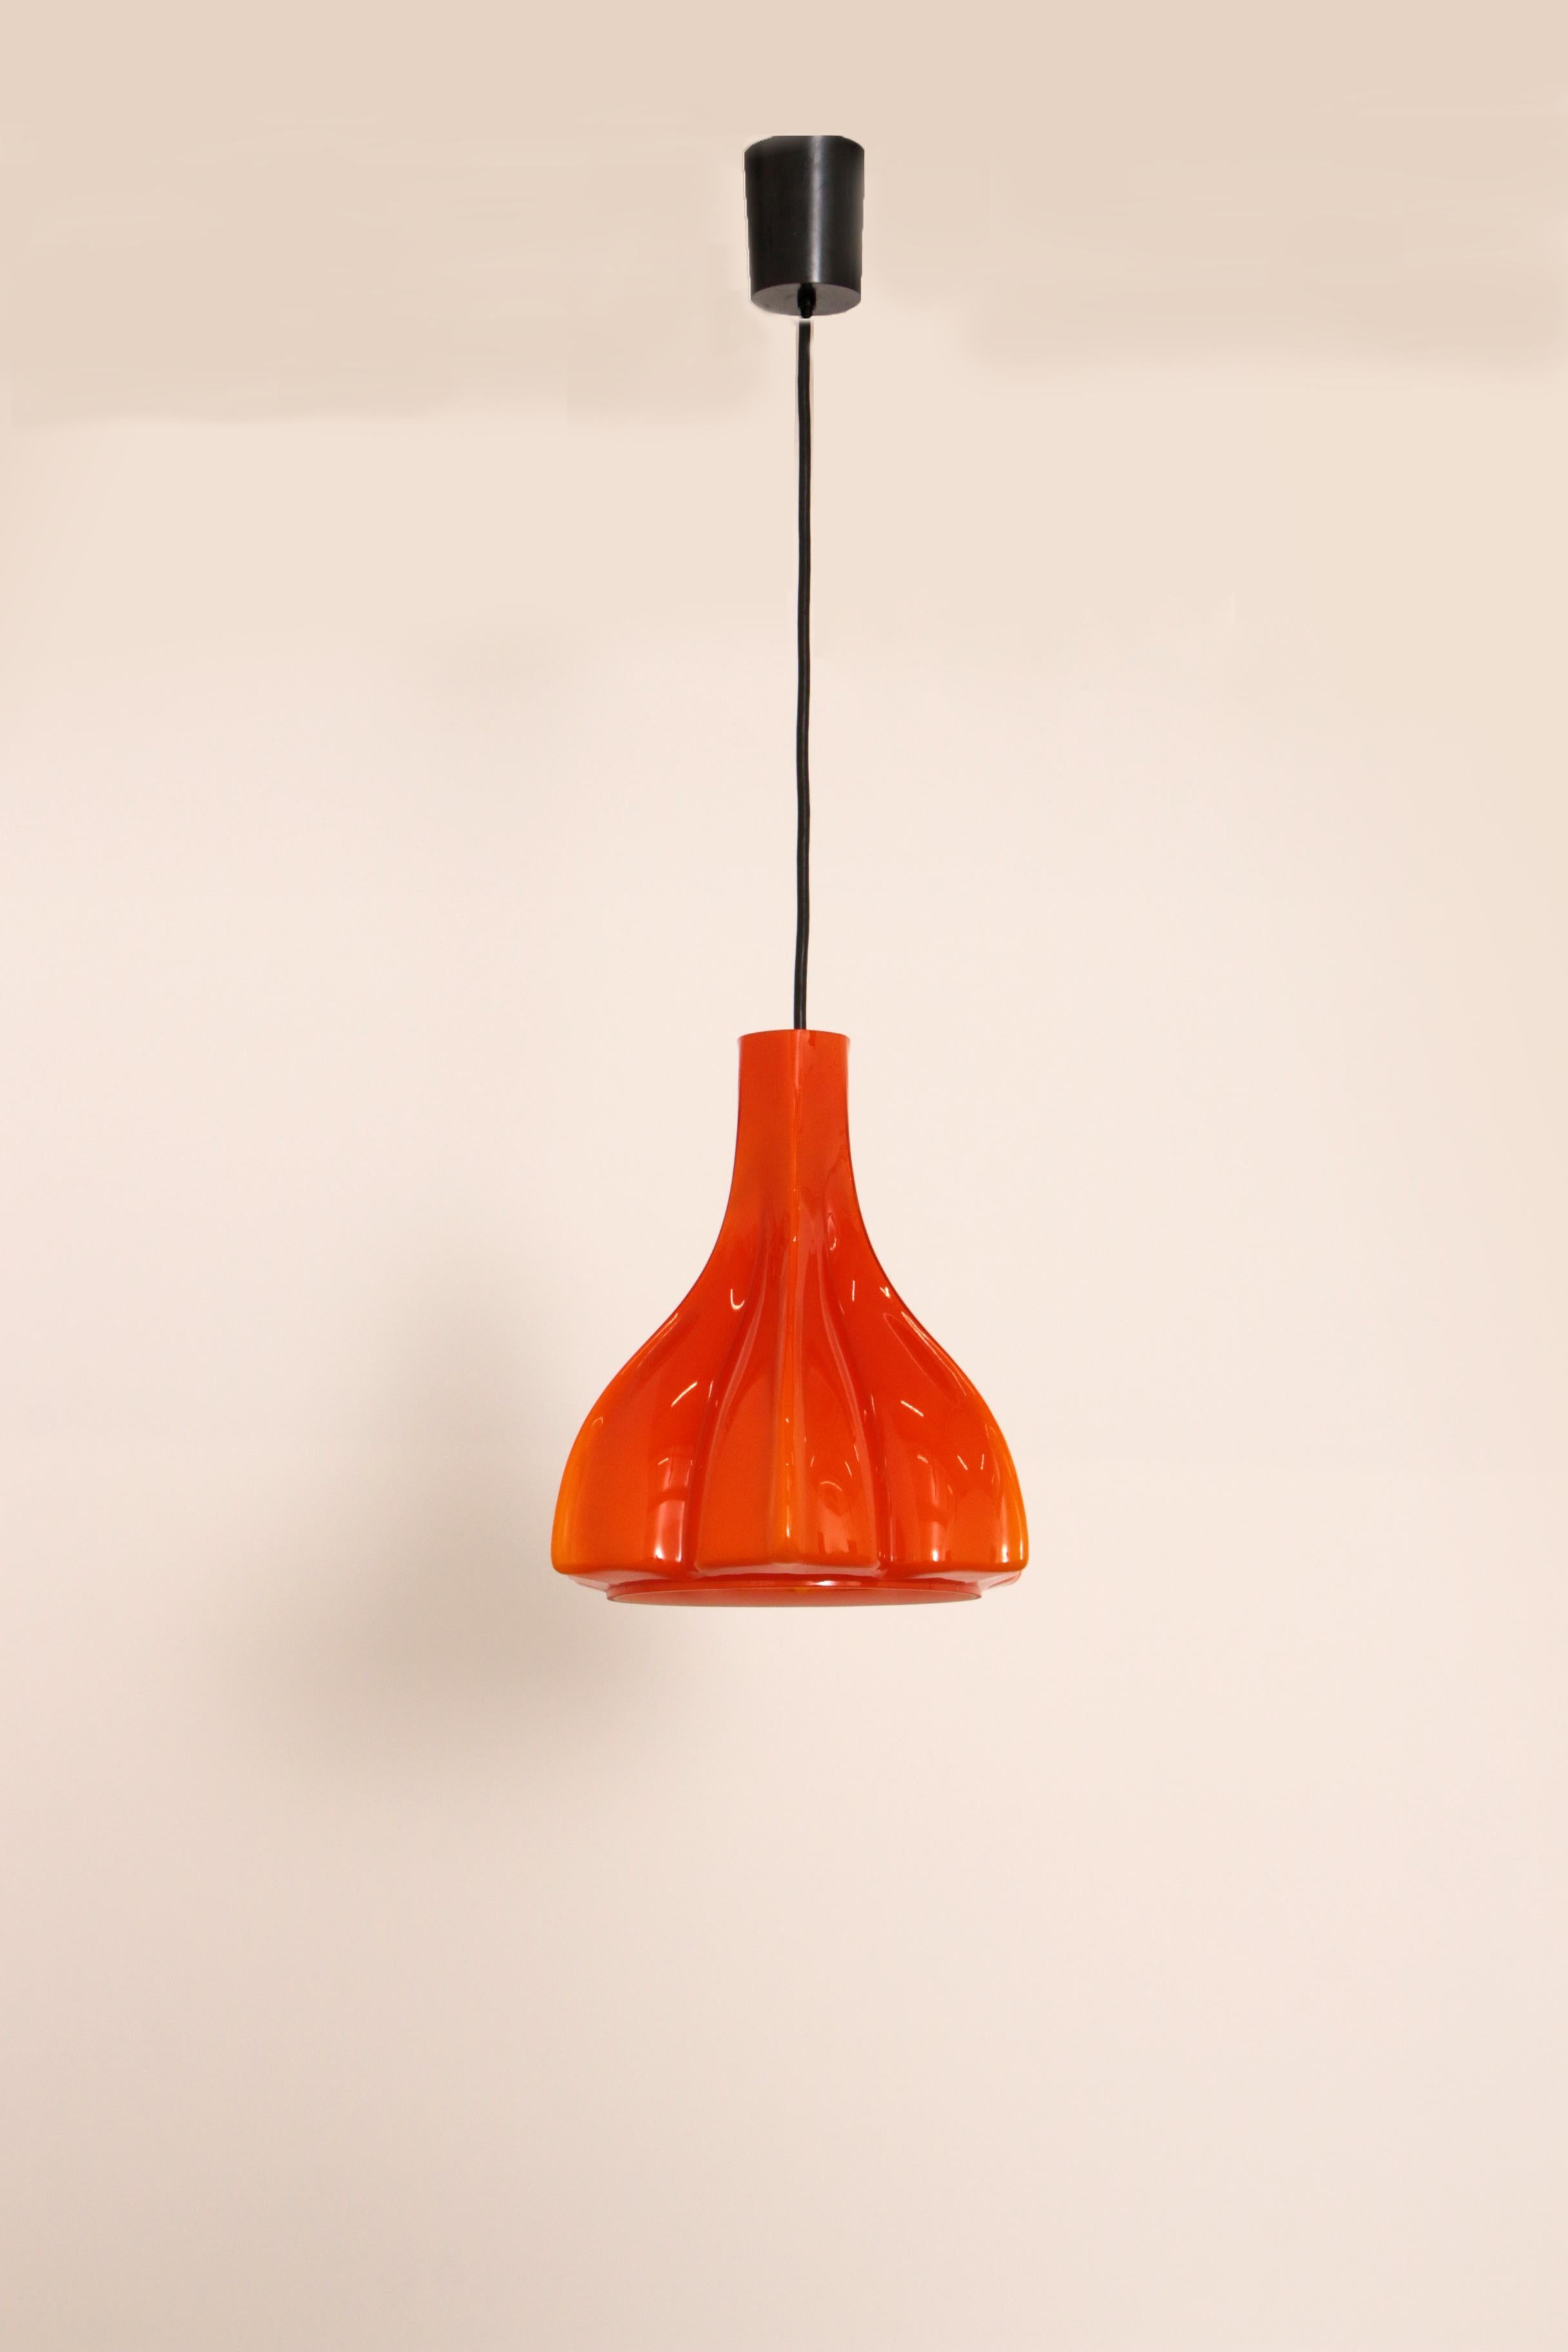 Particularly rare shaped orange glass hanging lamp by Peill and Putzler, produced around 1960 in Germany. Has a beautiful bright orange color and gives a very warm light.

Typical design of the German makers. More glass pendant lights in